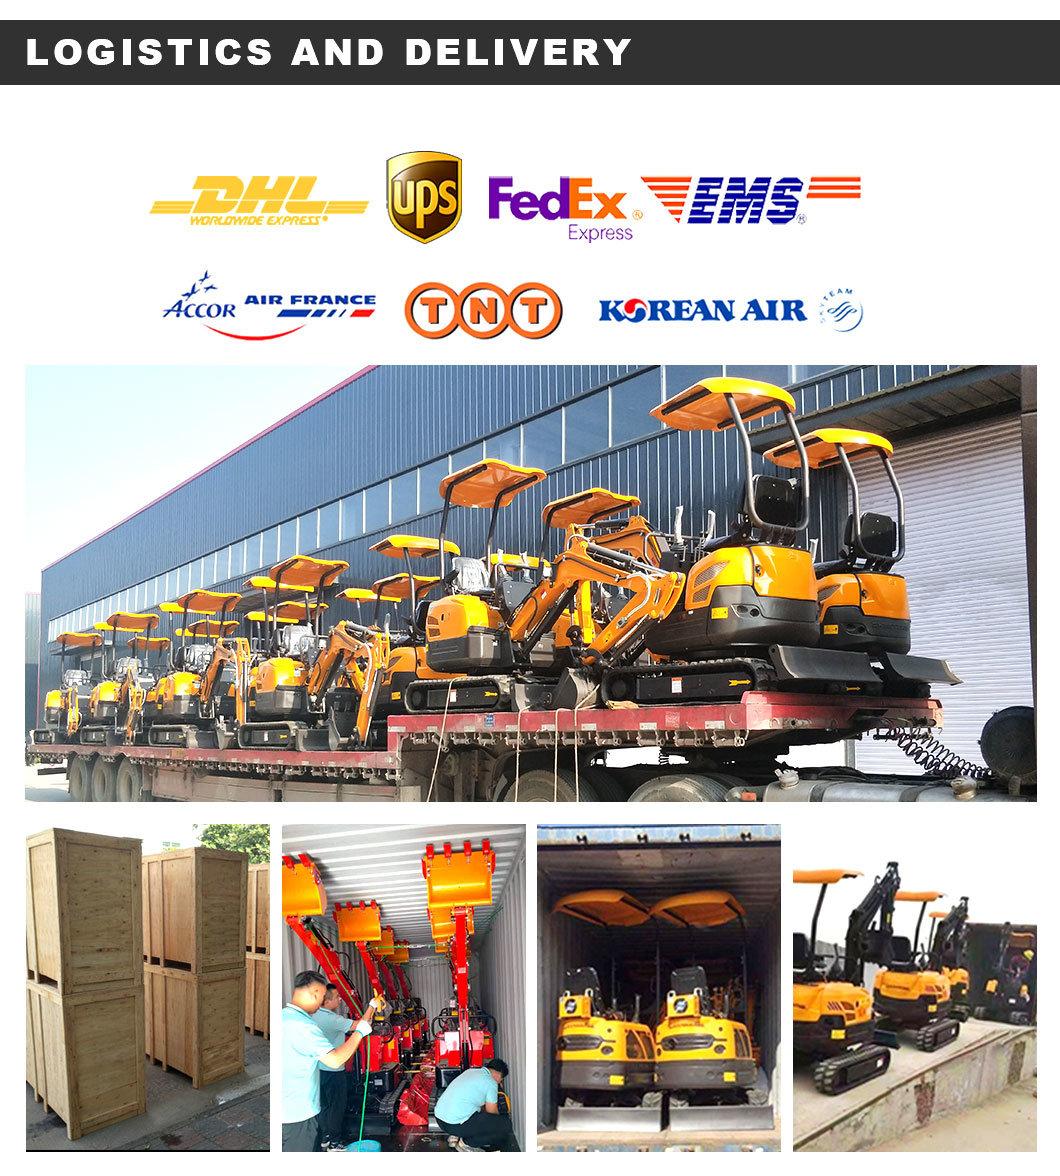 High-Quality Hot-Selling Product, High Operating Efficiency 1.5km/H Small Excavator